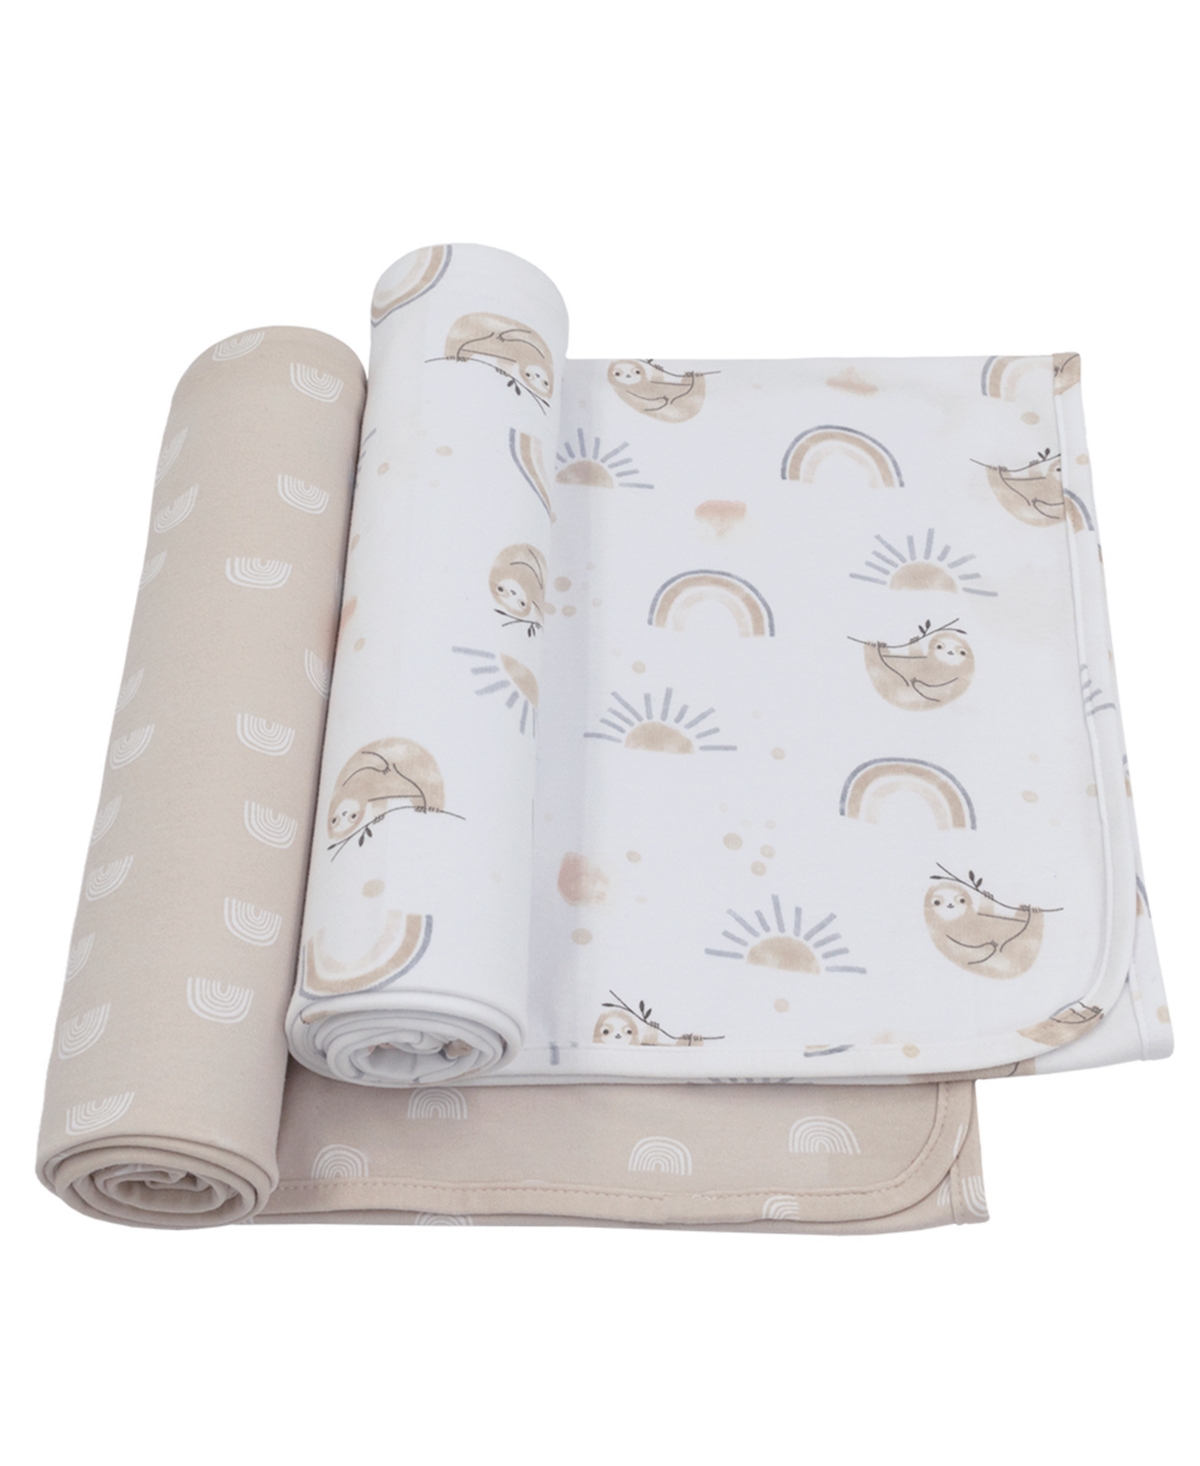 Living Textiles Baby Boys Or Baby Girls Cotton Jersey Swaddle Blankets, Pack Of 2 In Multicolor